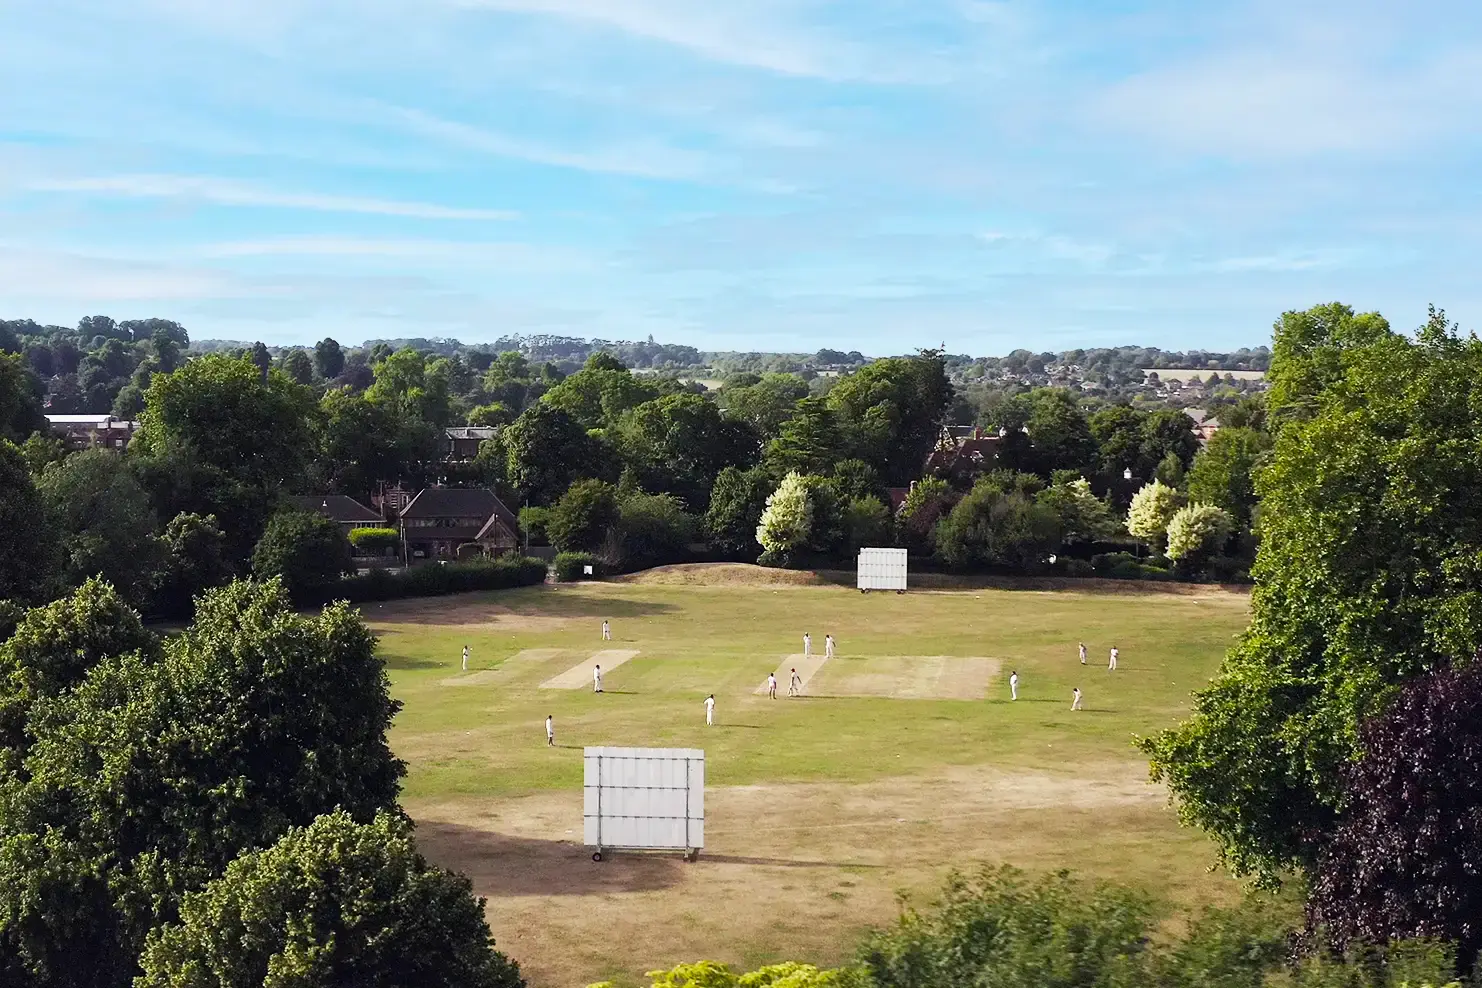 aerial perspective of cricket match